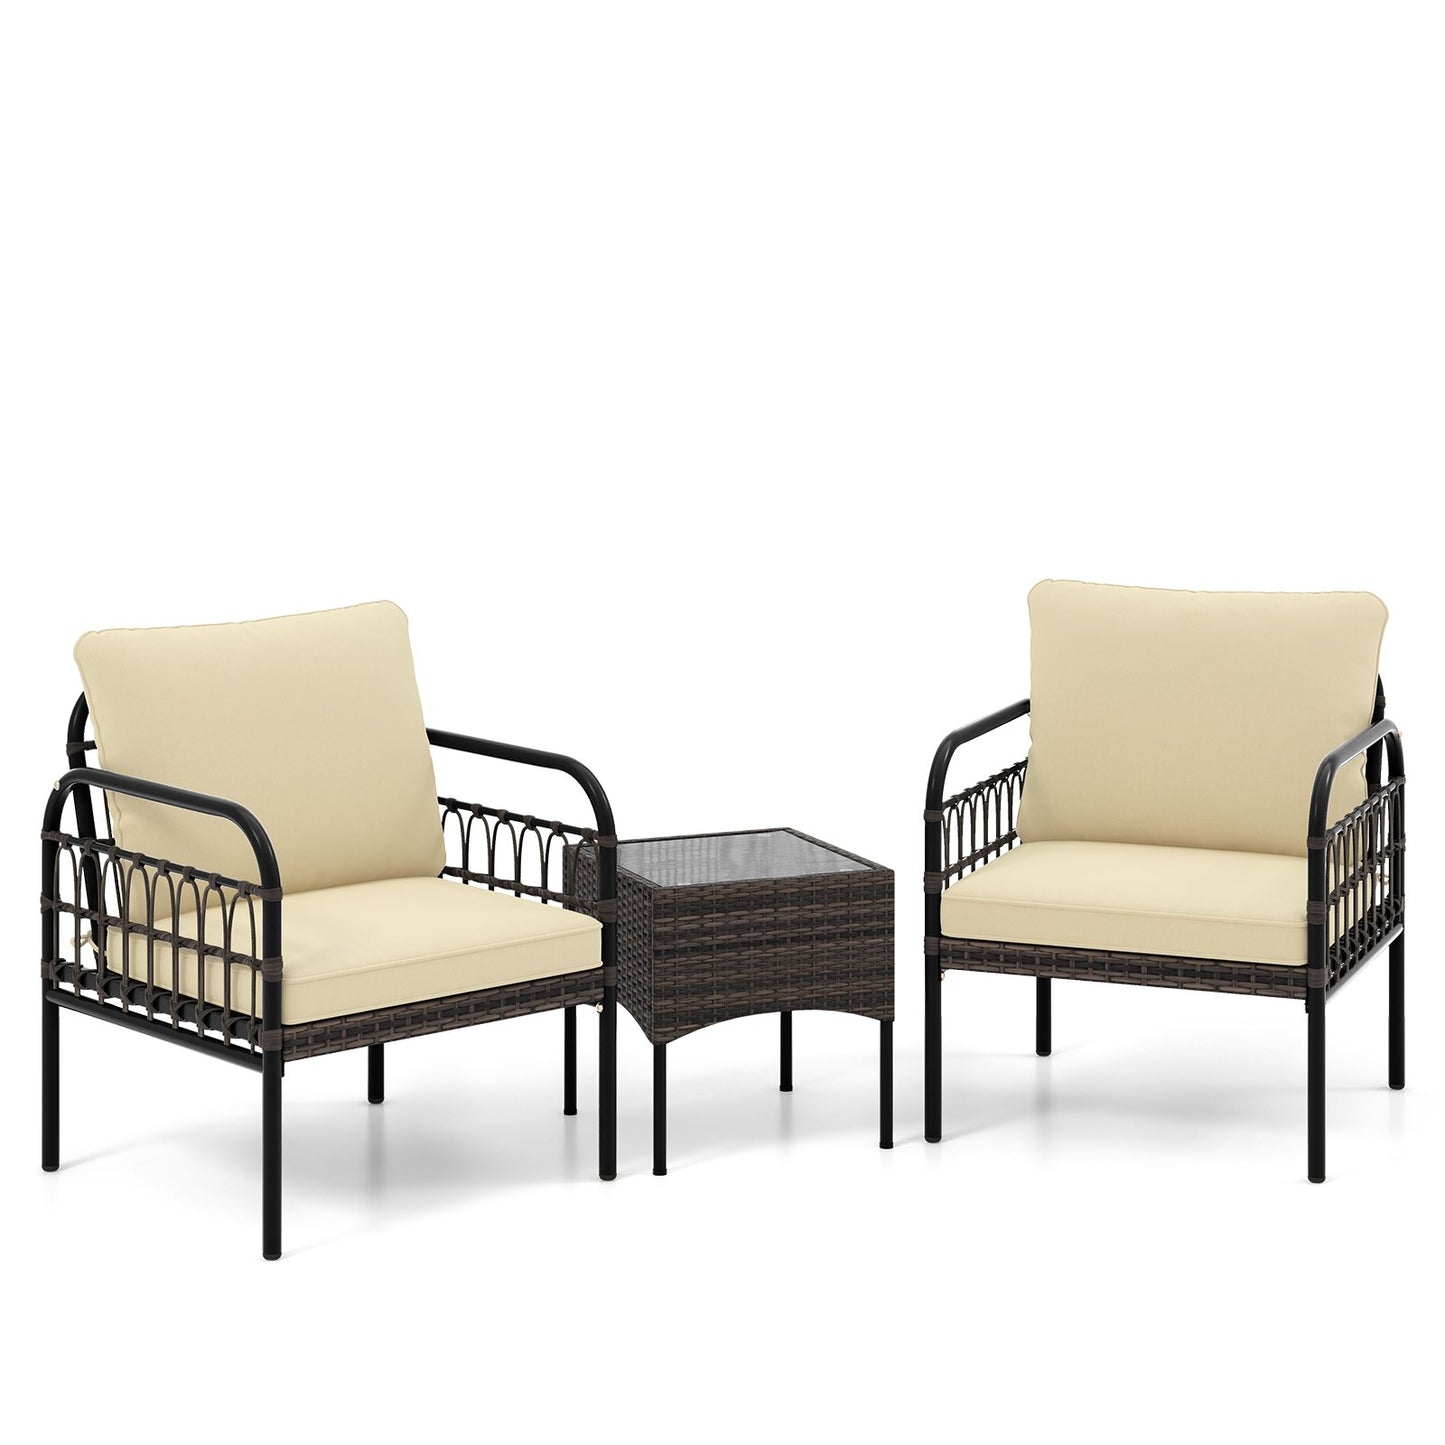 3 Pieces Patio Wicker Conversation Set with Cushions and Tempered Glass Coffee Table, Beige